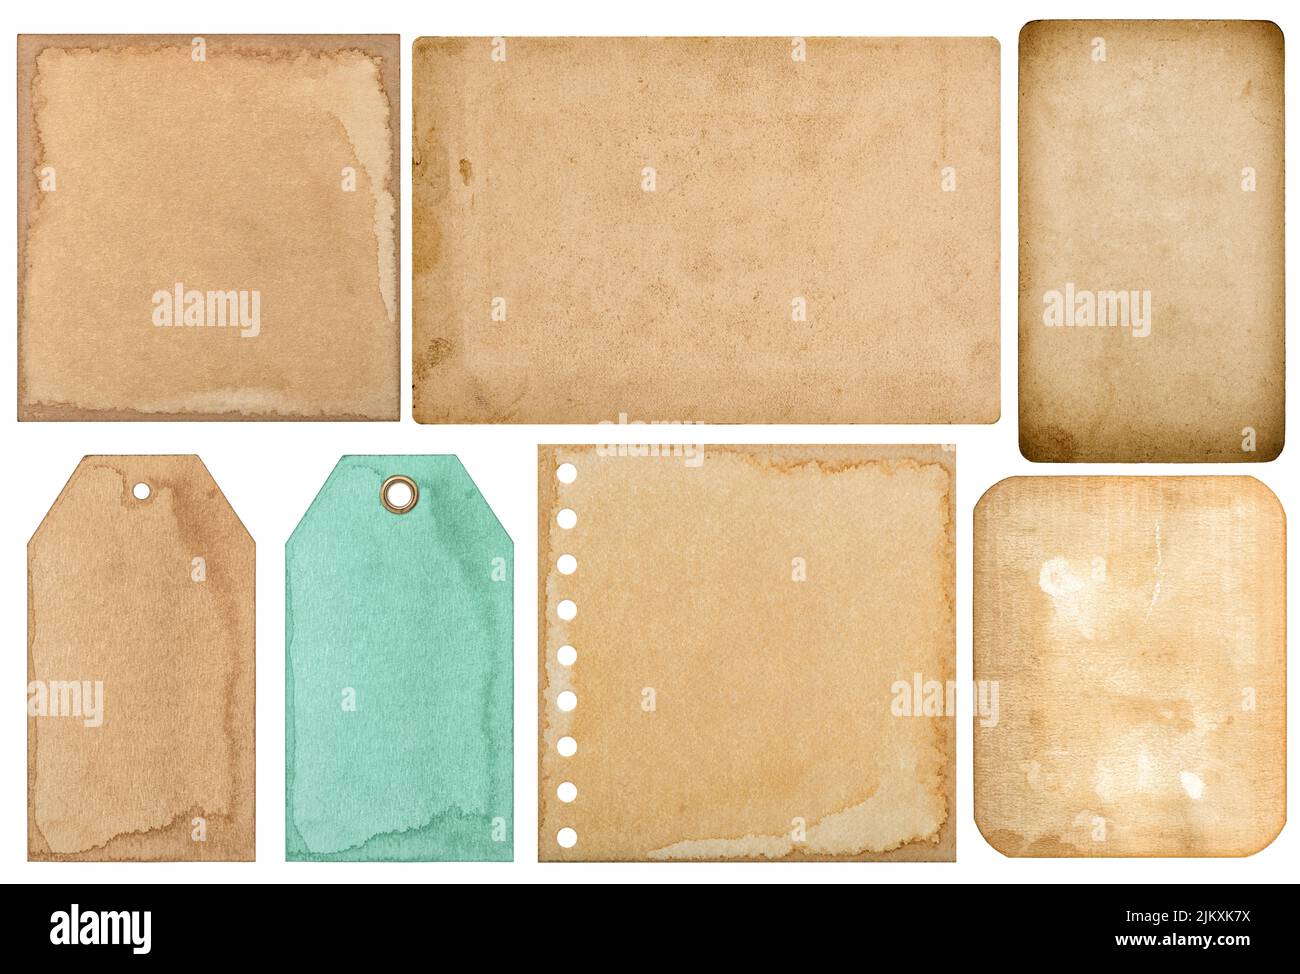 Old papers isolated on white background. Scrapbooking crafting junk journal Stock Photo